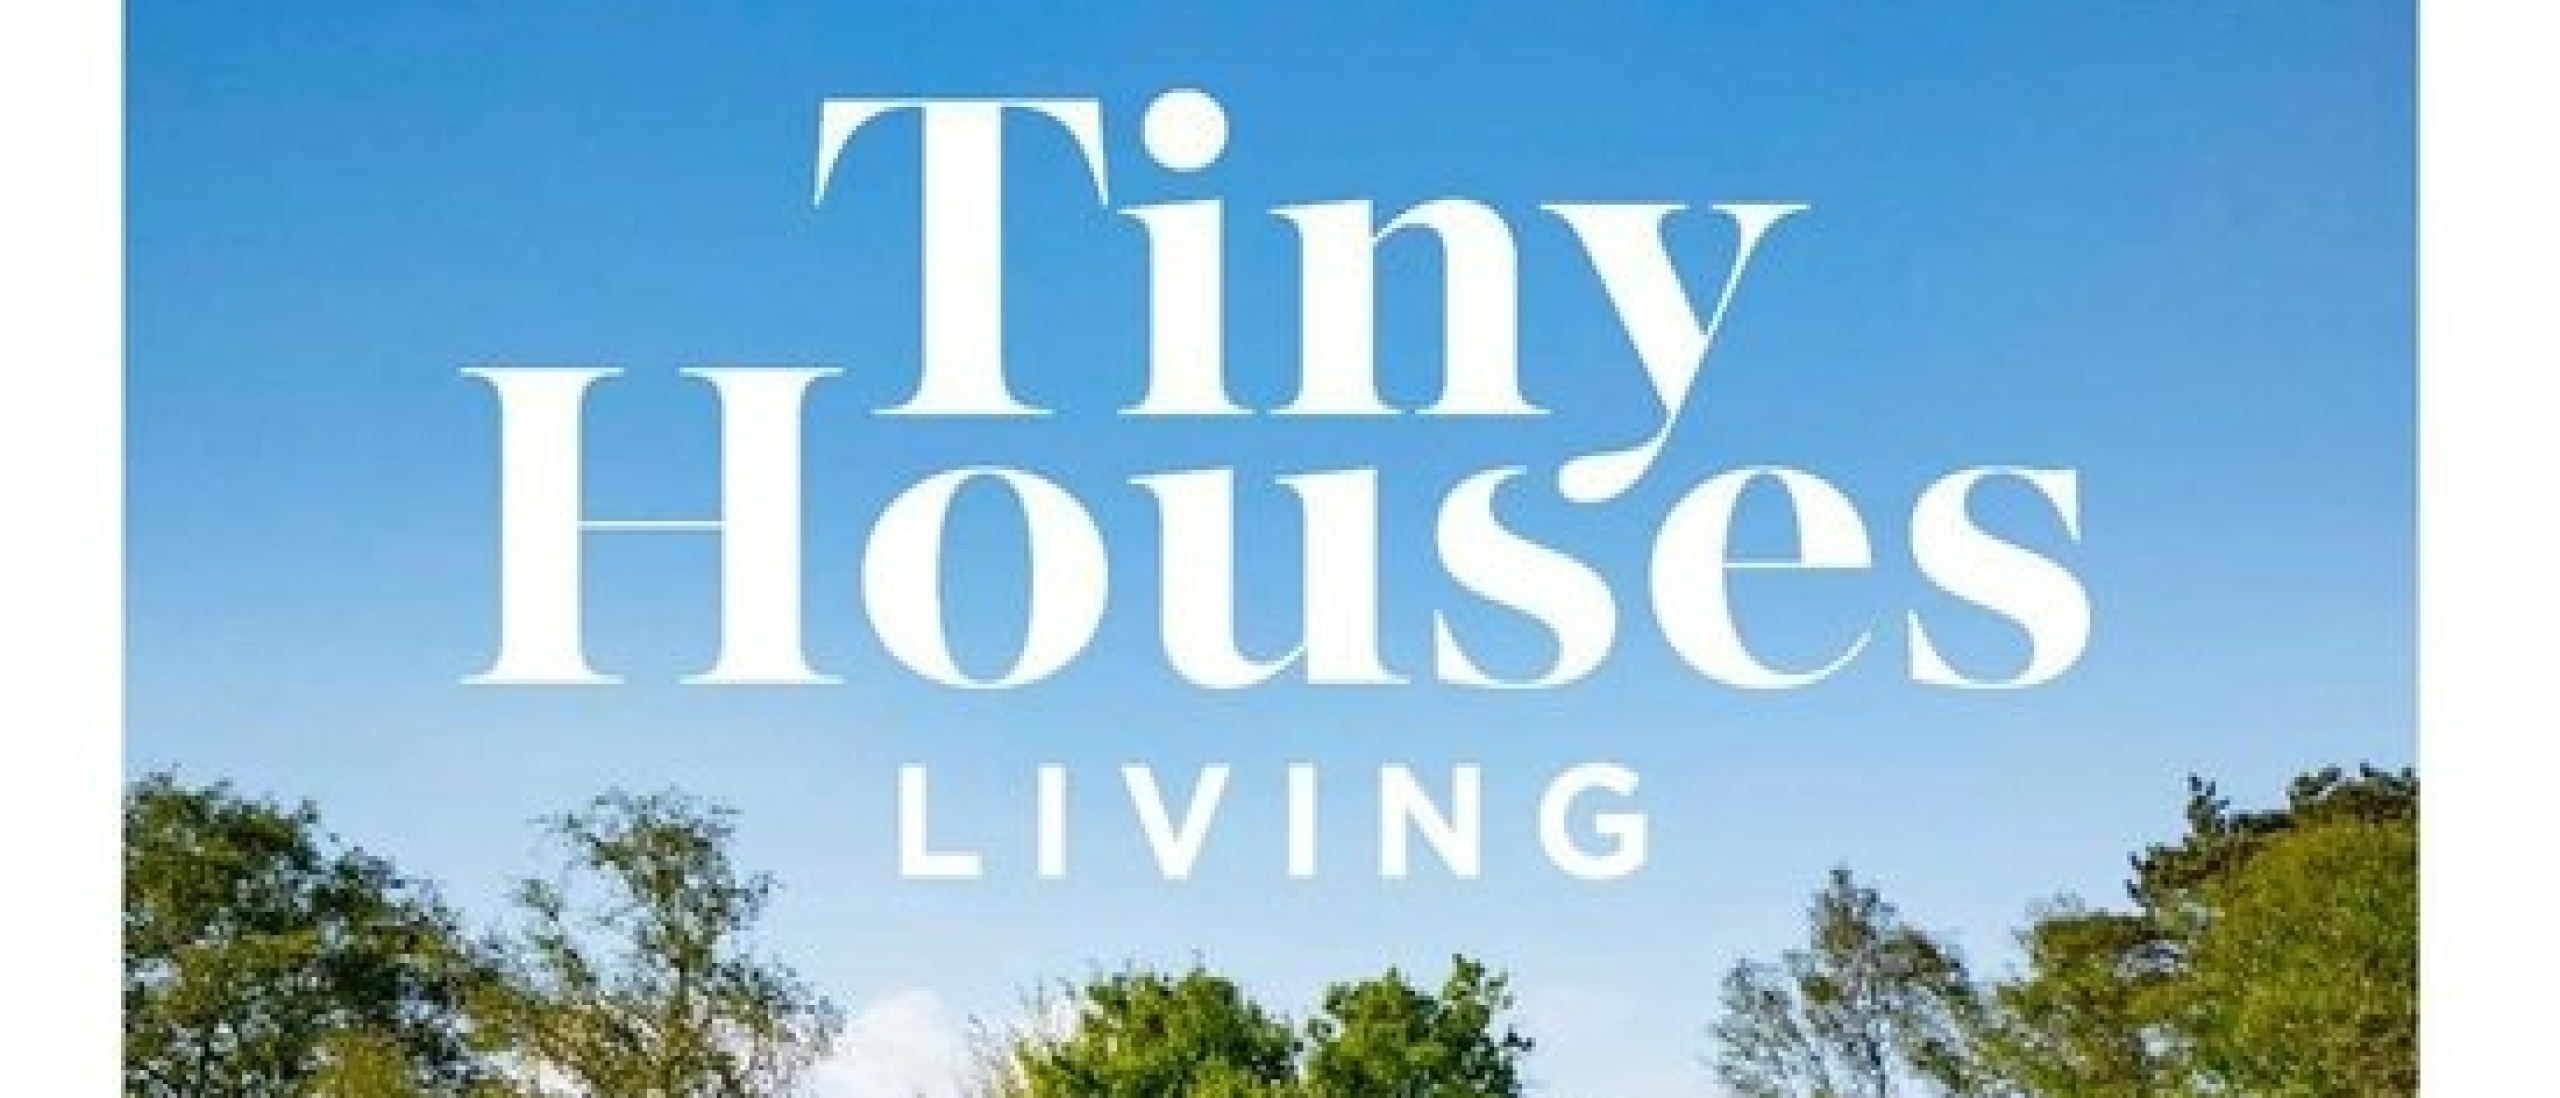 Tiny Houses Living, minder huis meer leven